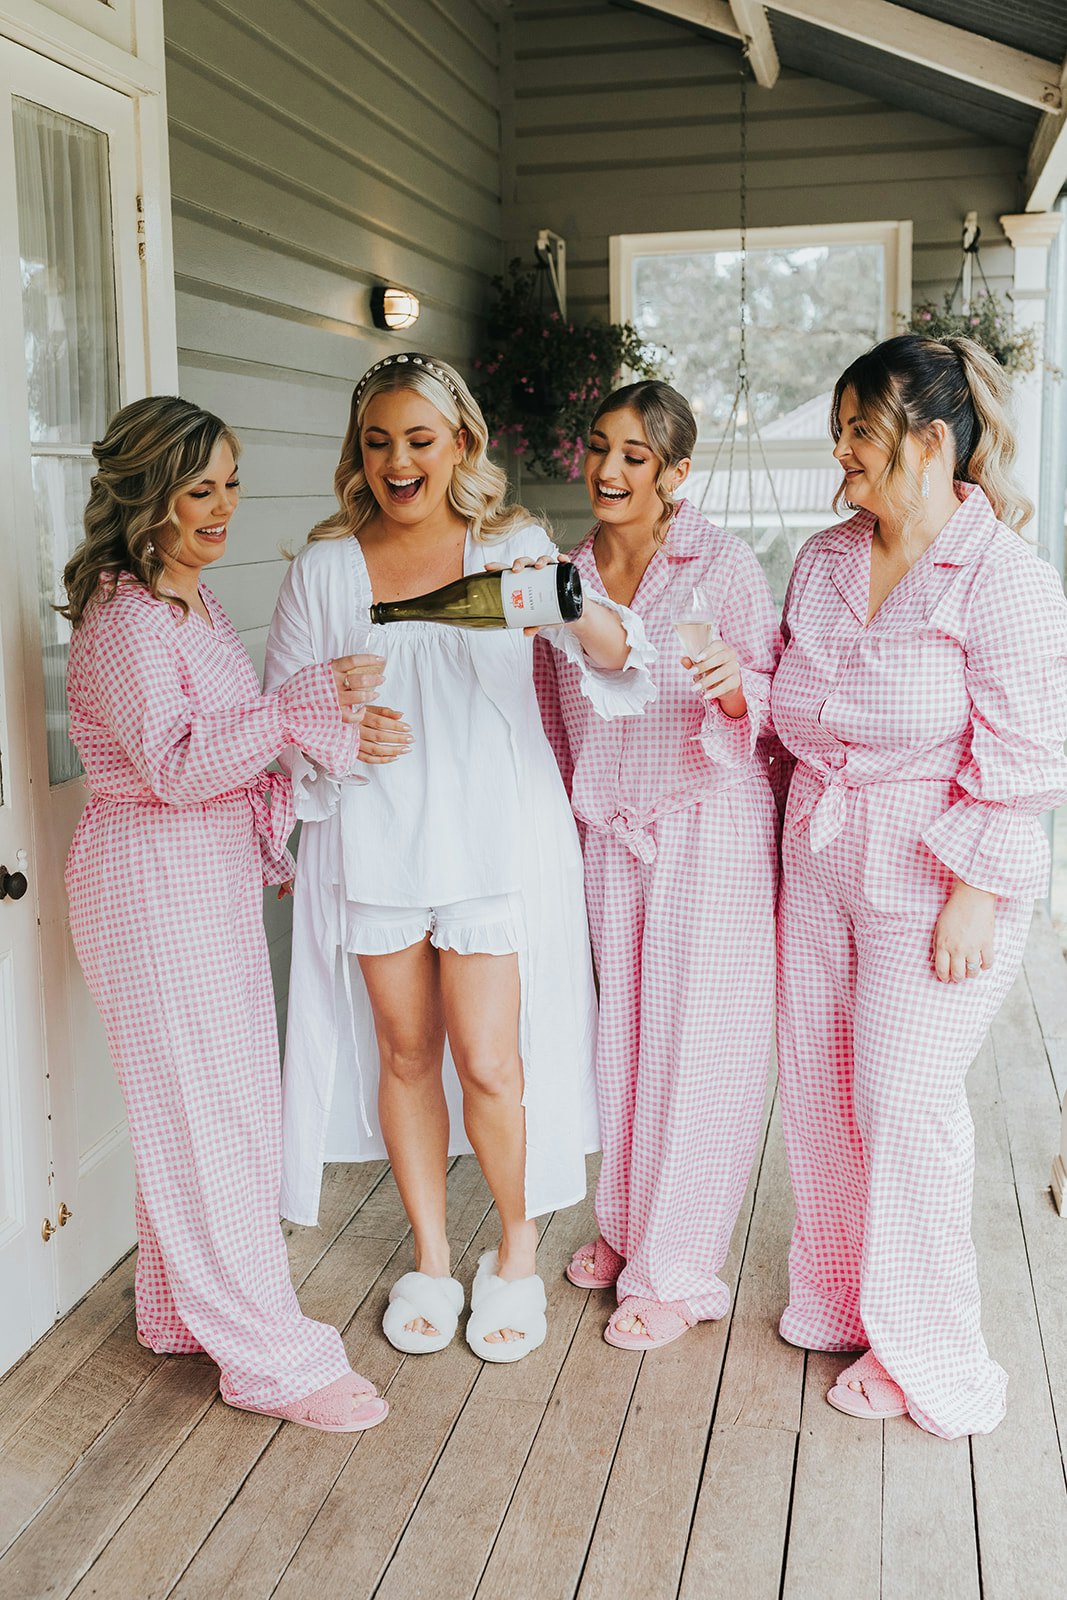 Bride and bridesmaids drinking champagne in pyjamas